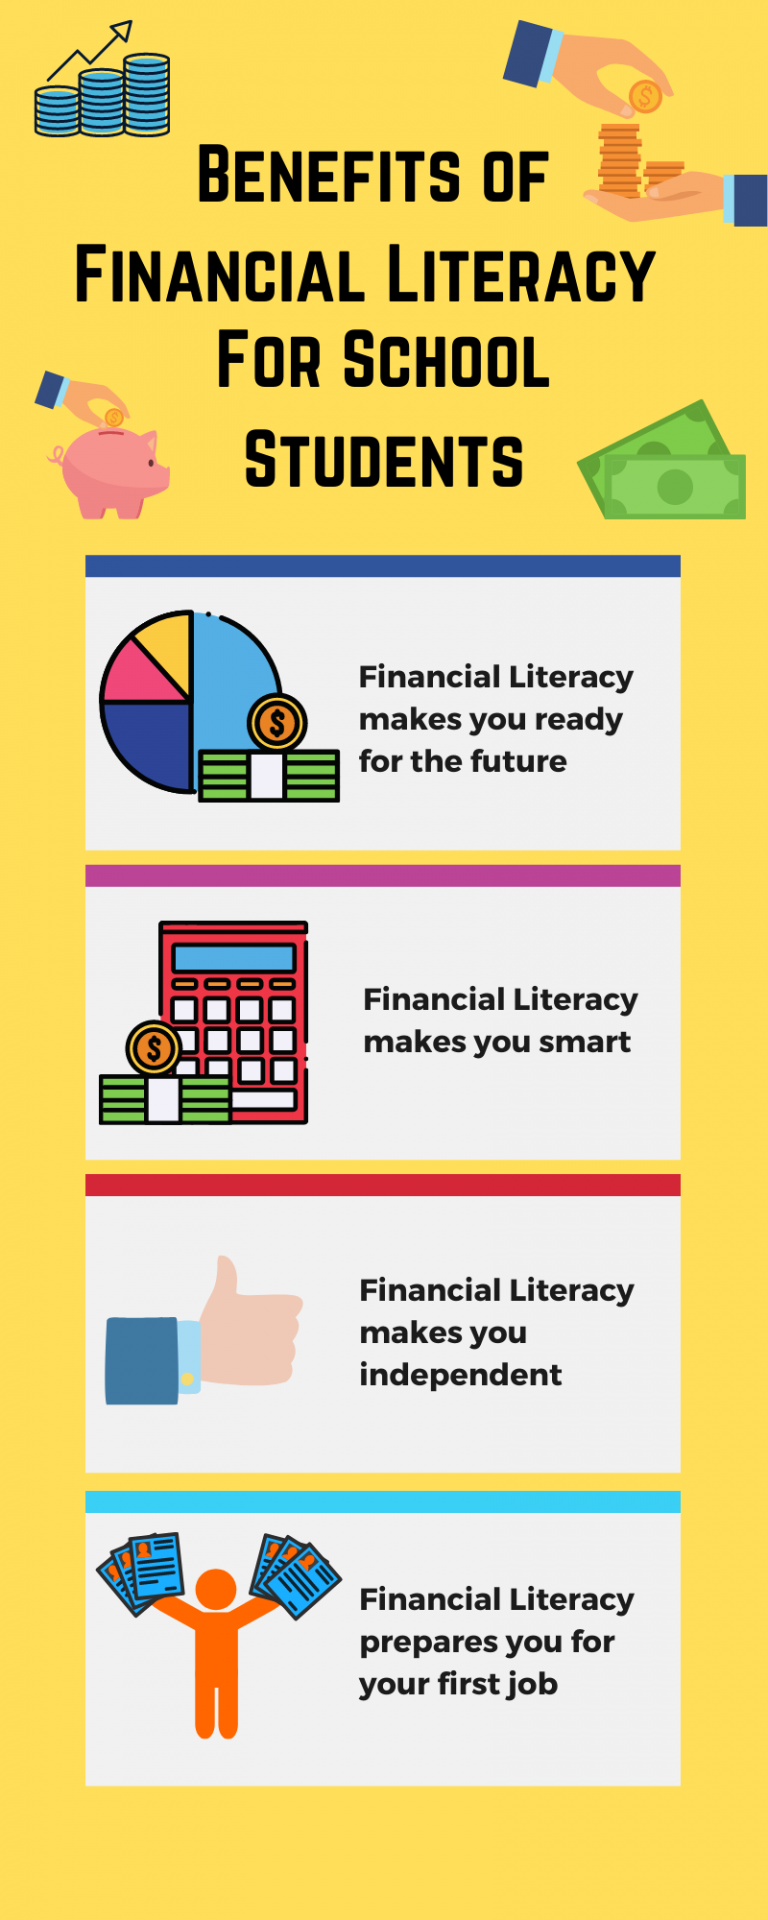 Financial Literacy Skills Top 5 Reasons Why School Students Must Learn